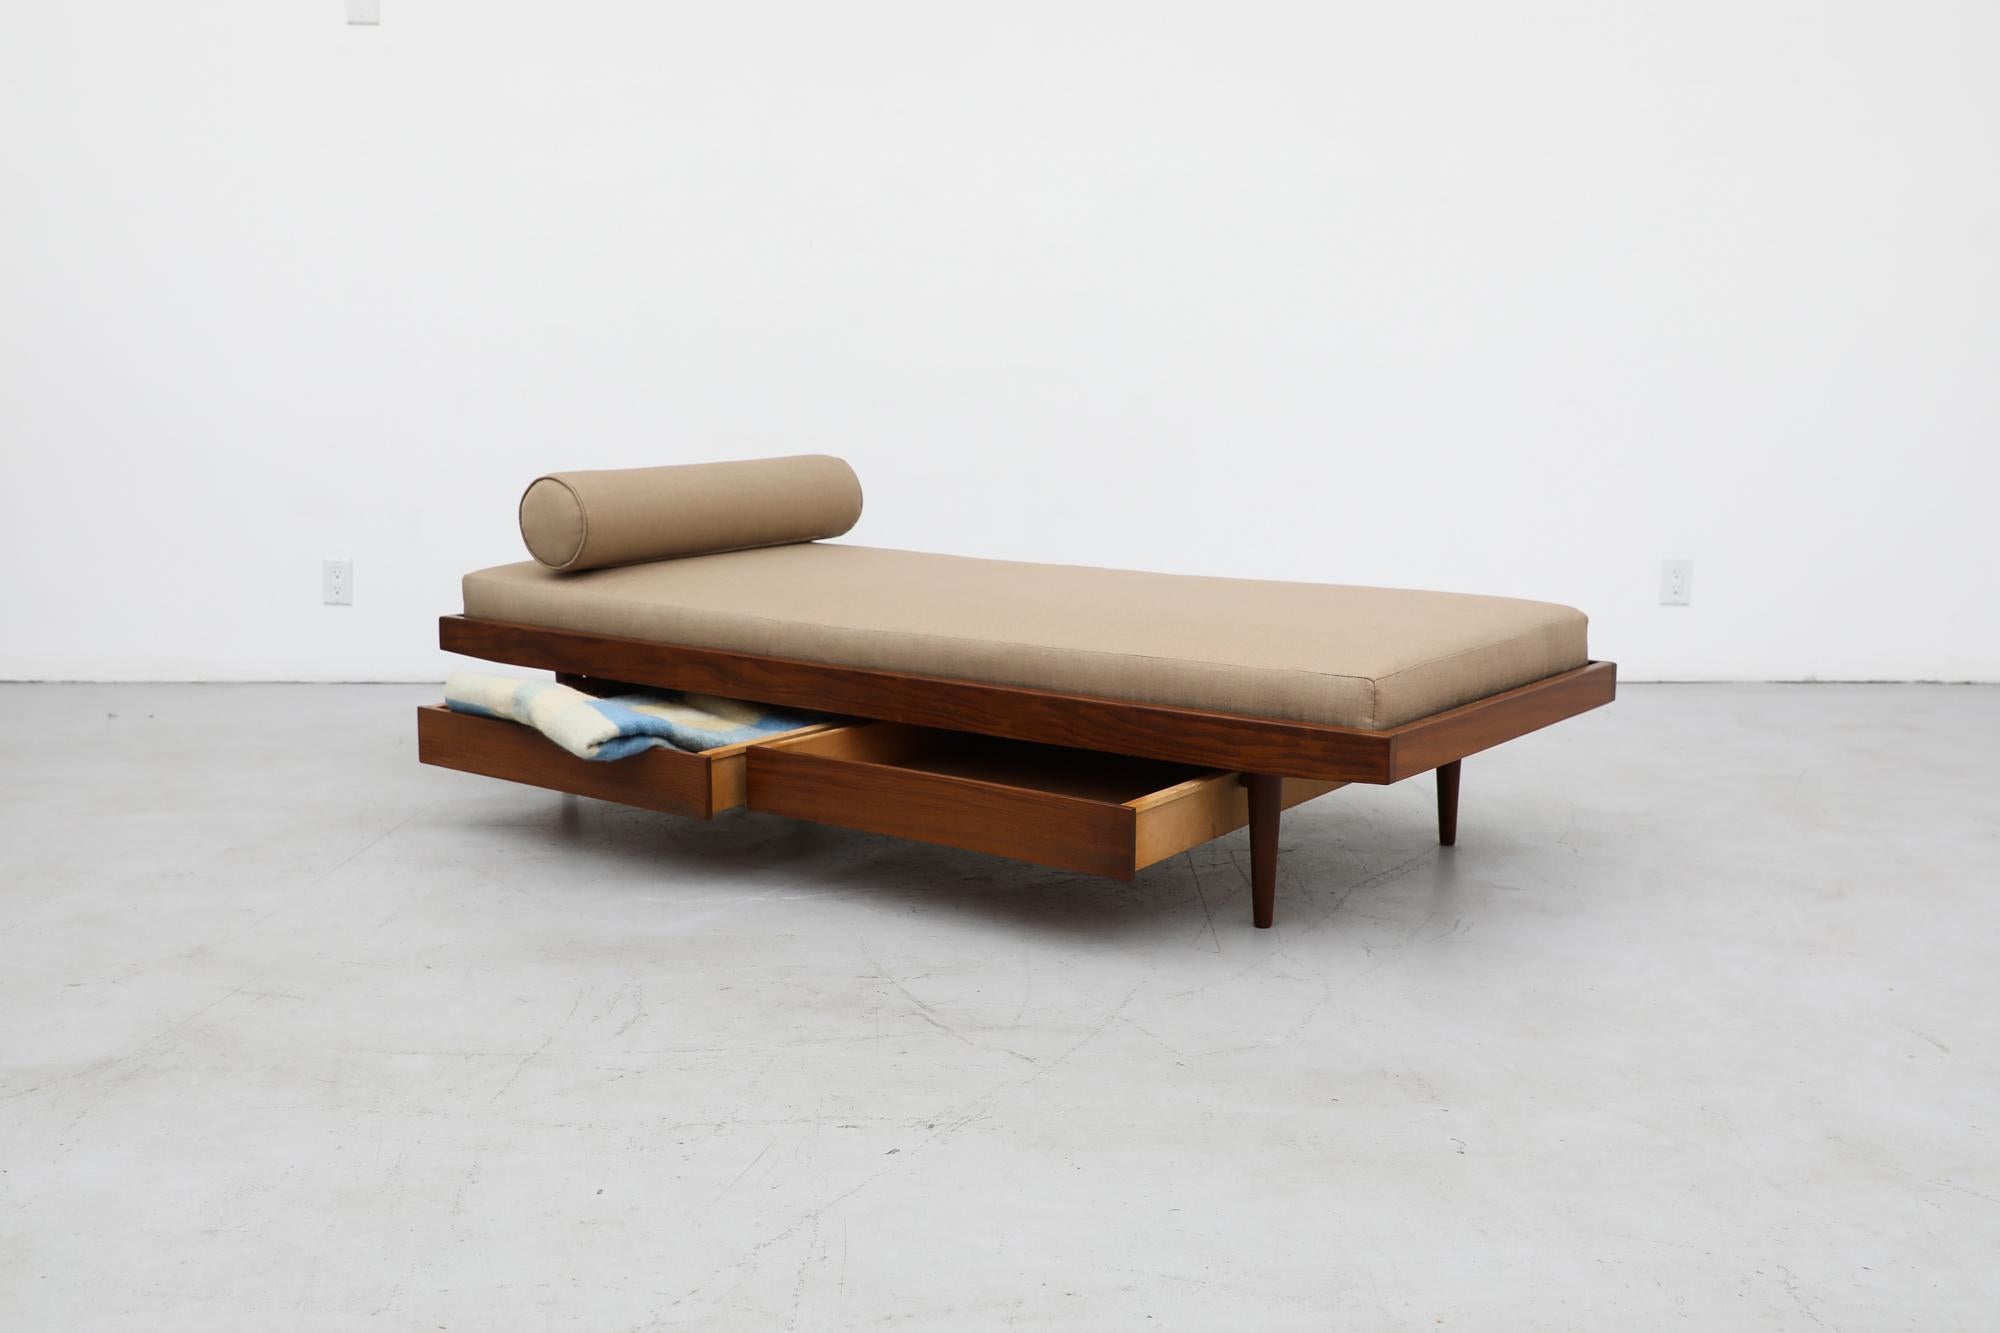 Beautiful midcentury teak daybed with new taupe upholstered mattress and bolster. A sleek modern design with two lower storage drawers, a raised edge frame, inset pegboard support, and tapered teak legs. The frame has been lightly refinished with